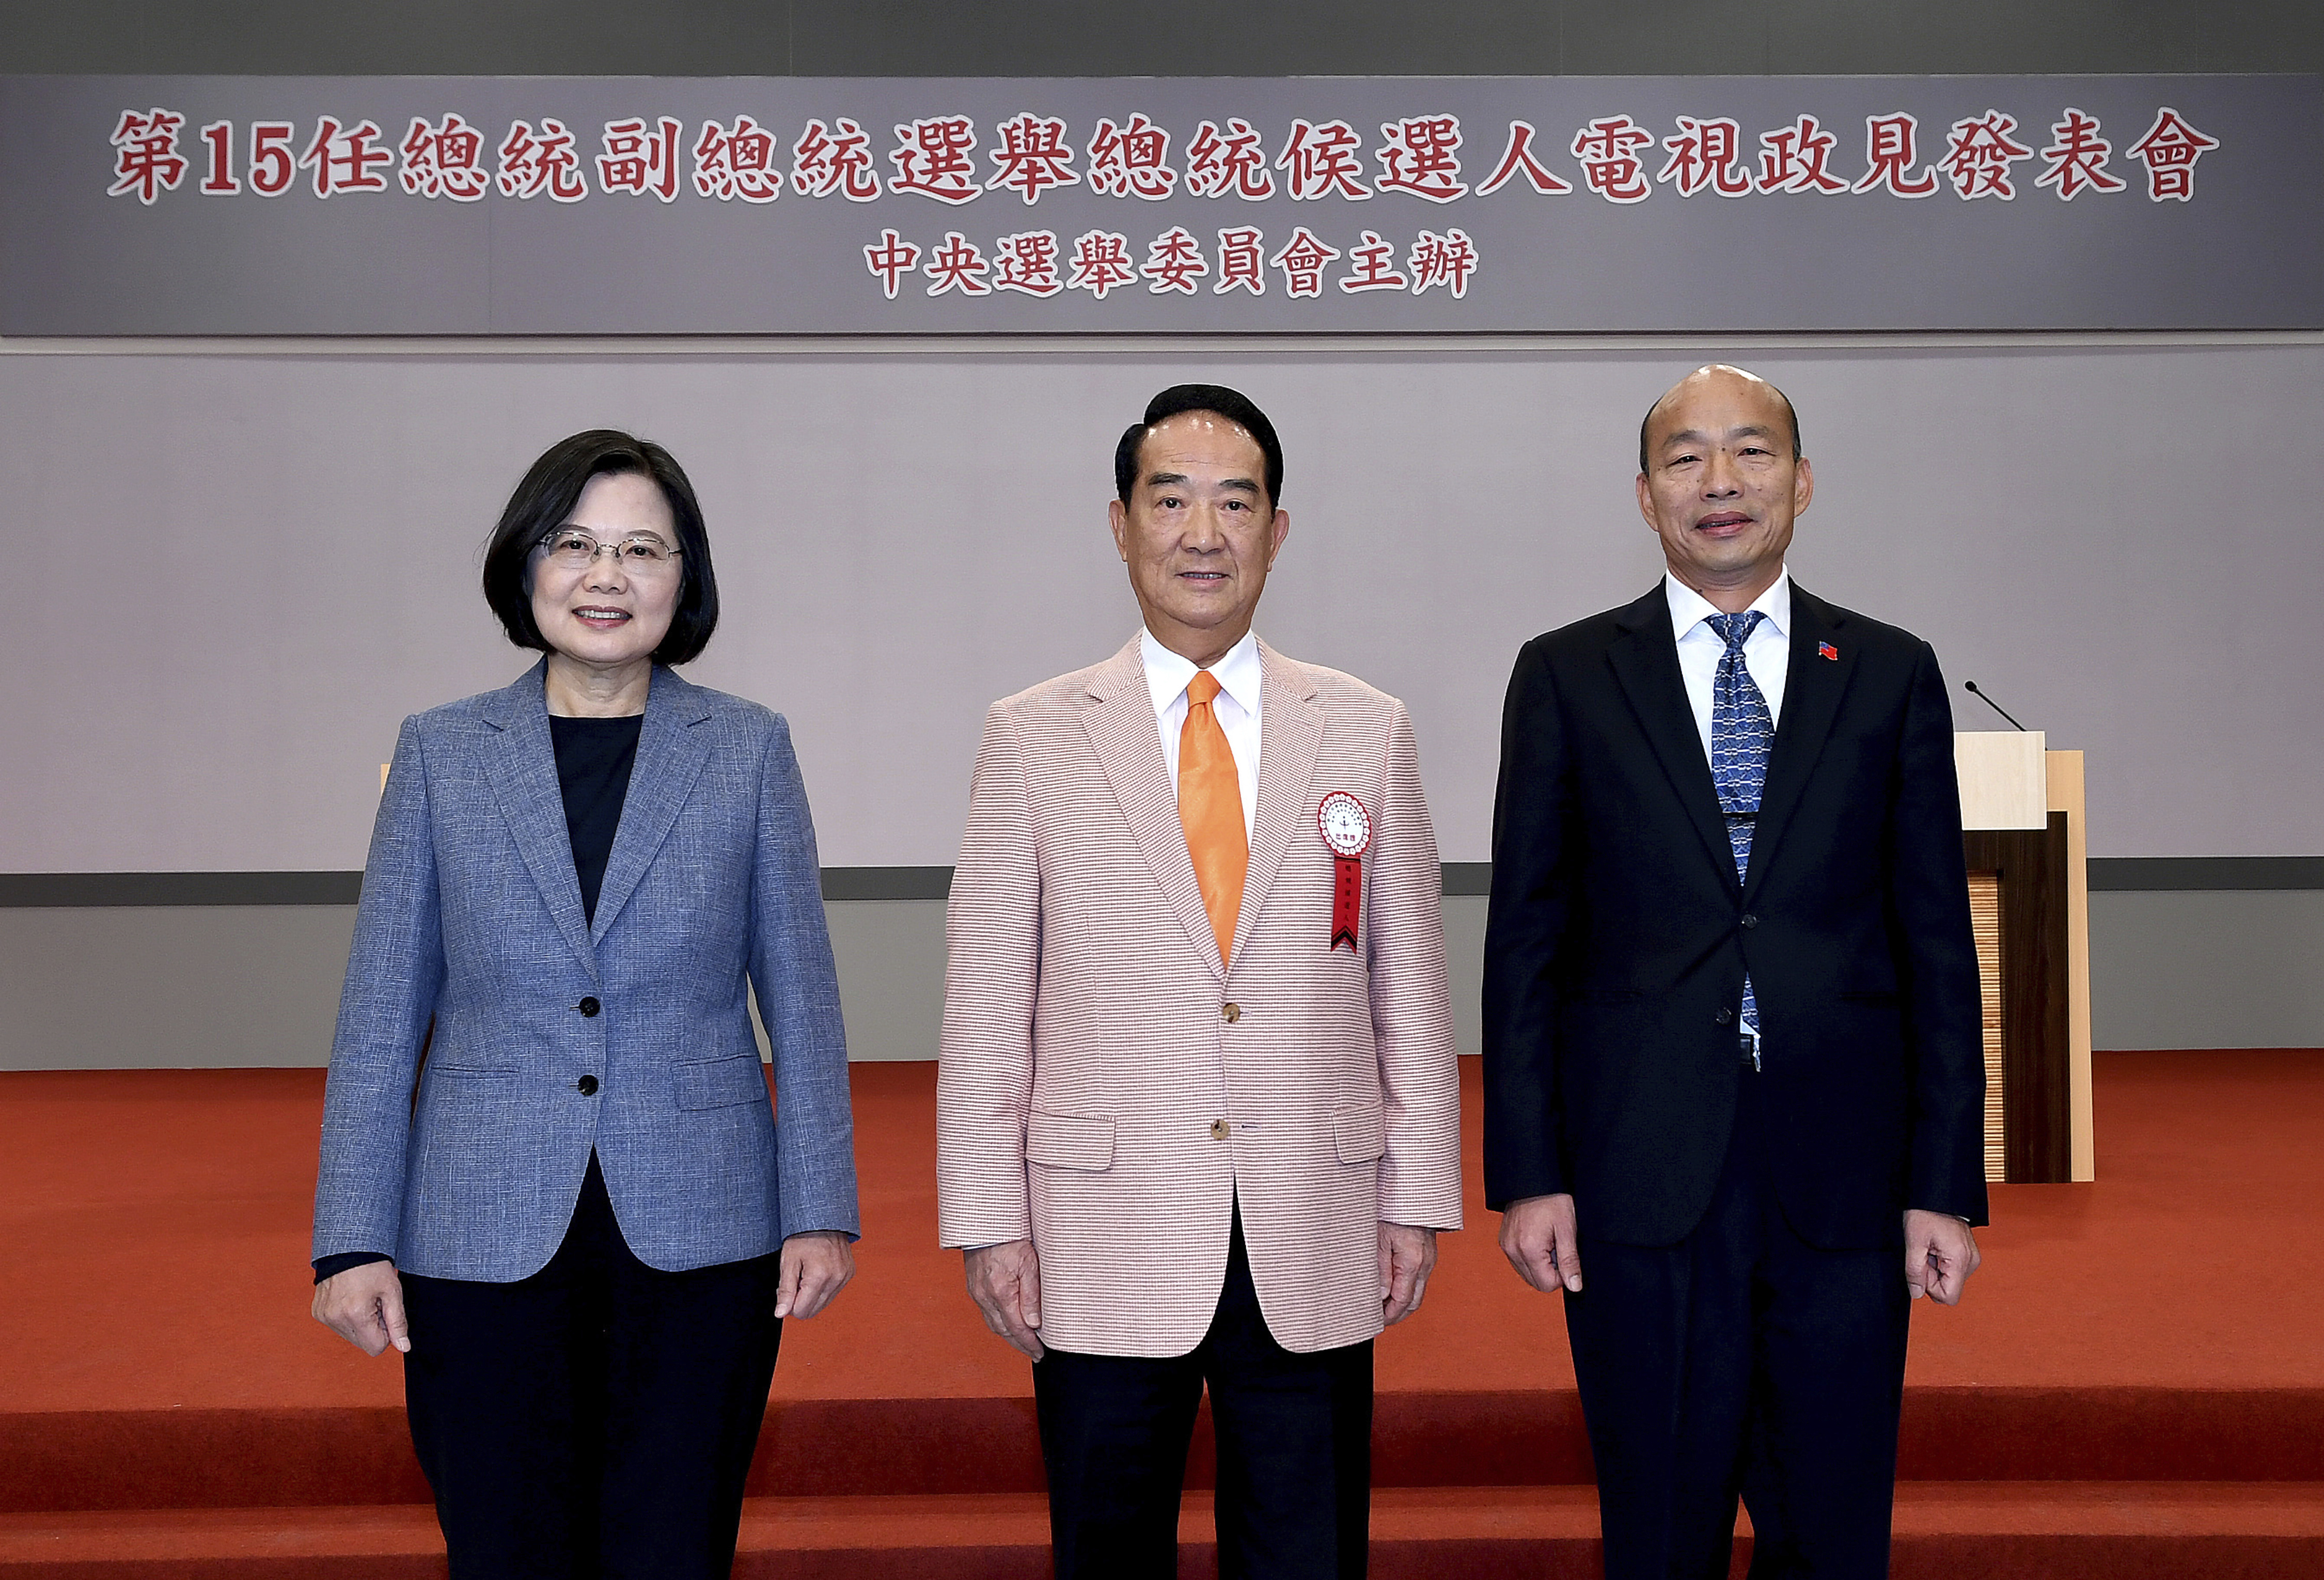 This photo released by Central Election Commission shows Taiwan's 2020 presidential election candidates, from left to right: President Tsai Ing-wen of the Democratic Progressive Party (DPP), People First Party's James Soong, and Han Kuo-yu of the KMT or Nationalist Party. Taiwan will hold its general elections on Saturday, Jan. 11, 2020. (Central Election Commission/AP)